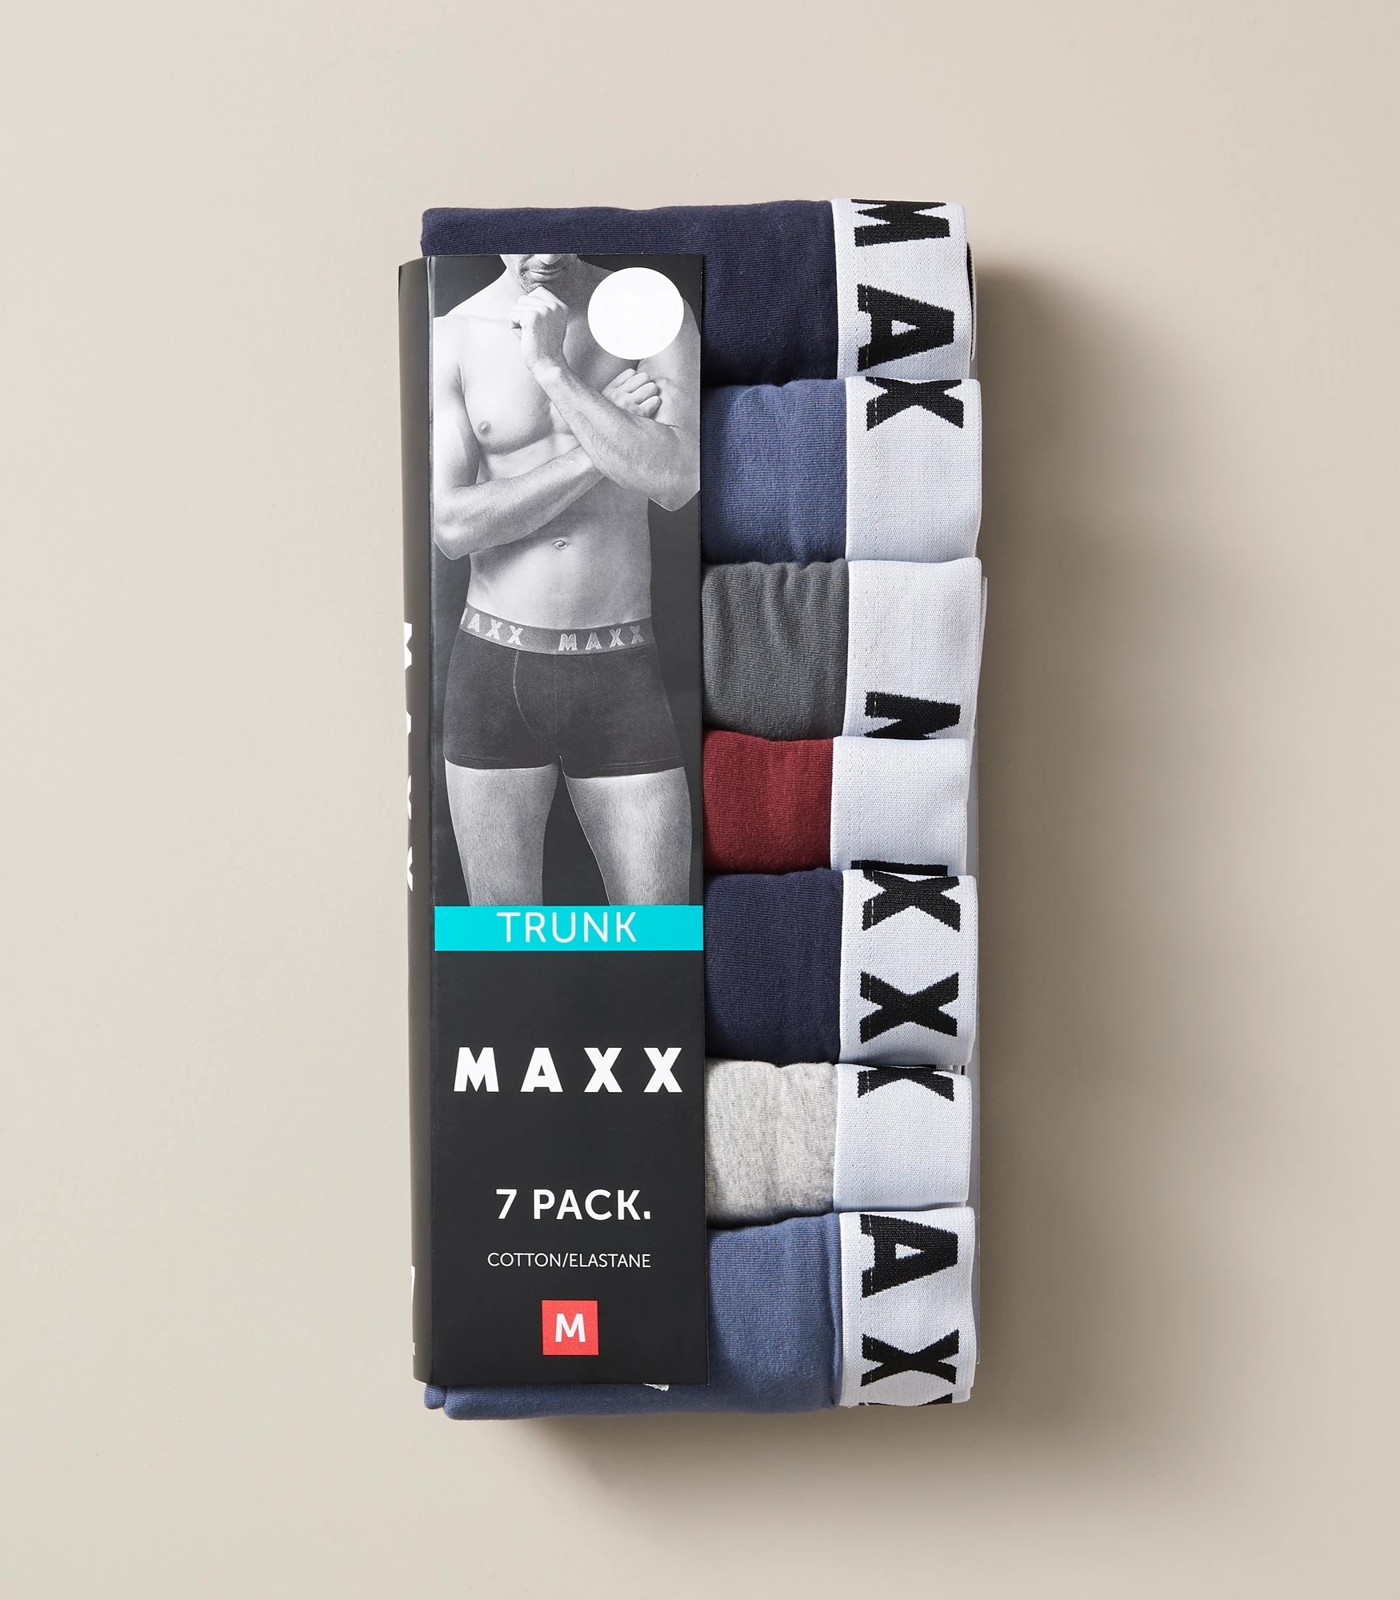 Maxx 7 Pack Trunks offer at Target